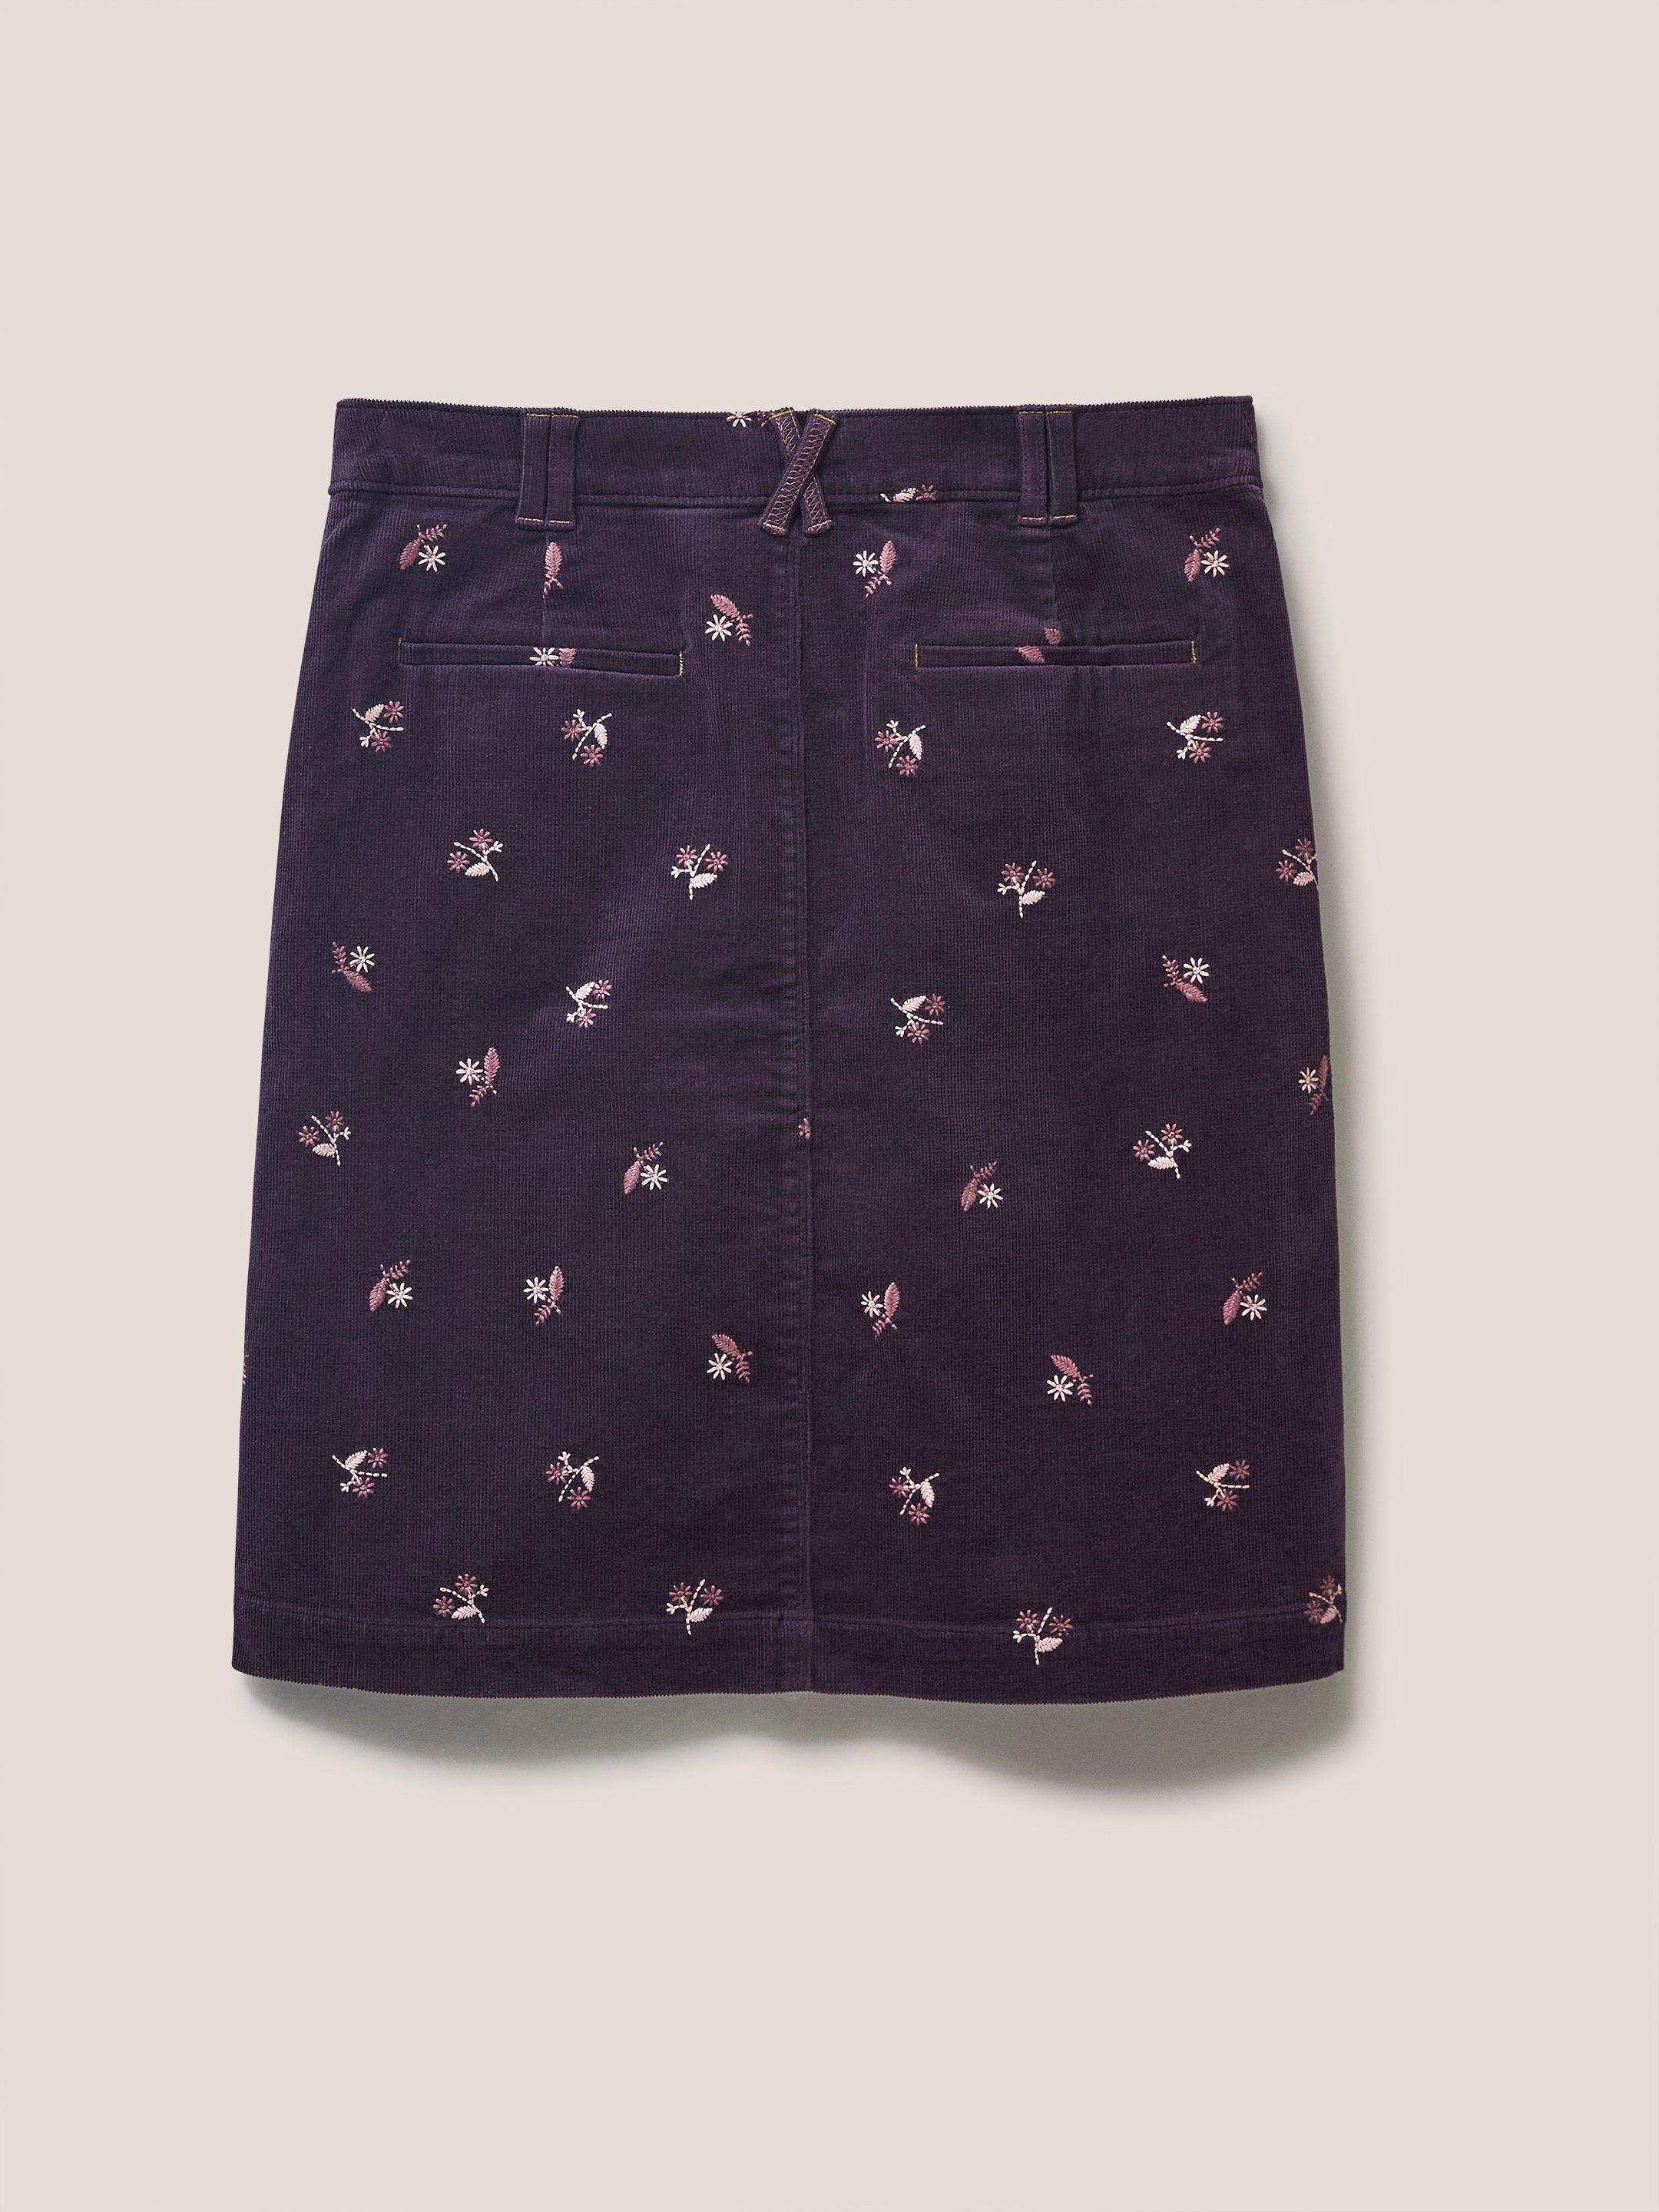 Melody Embroidered Cord Skirt in PURPLE MLT - FLAT BACK